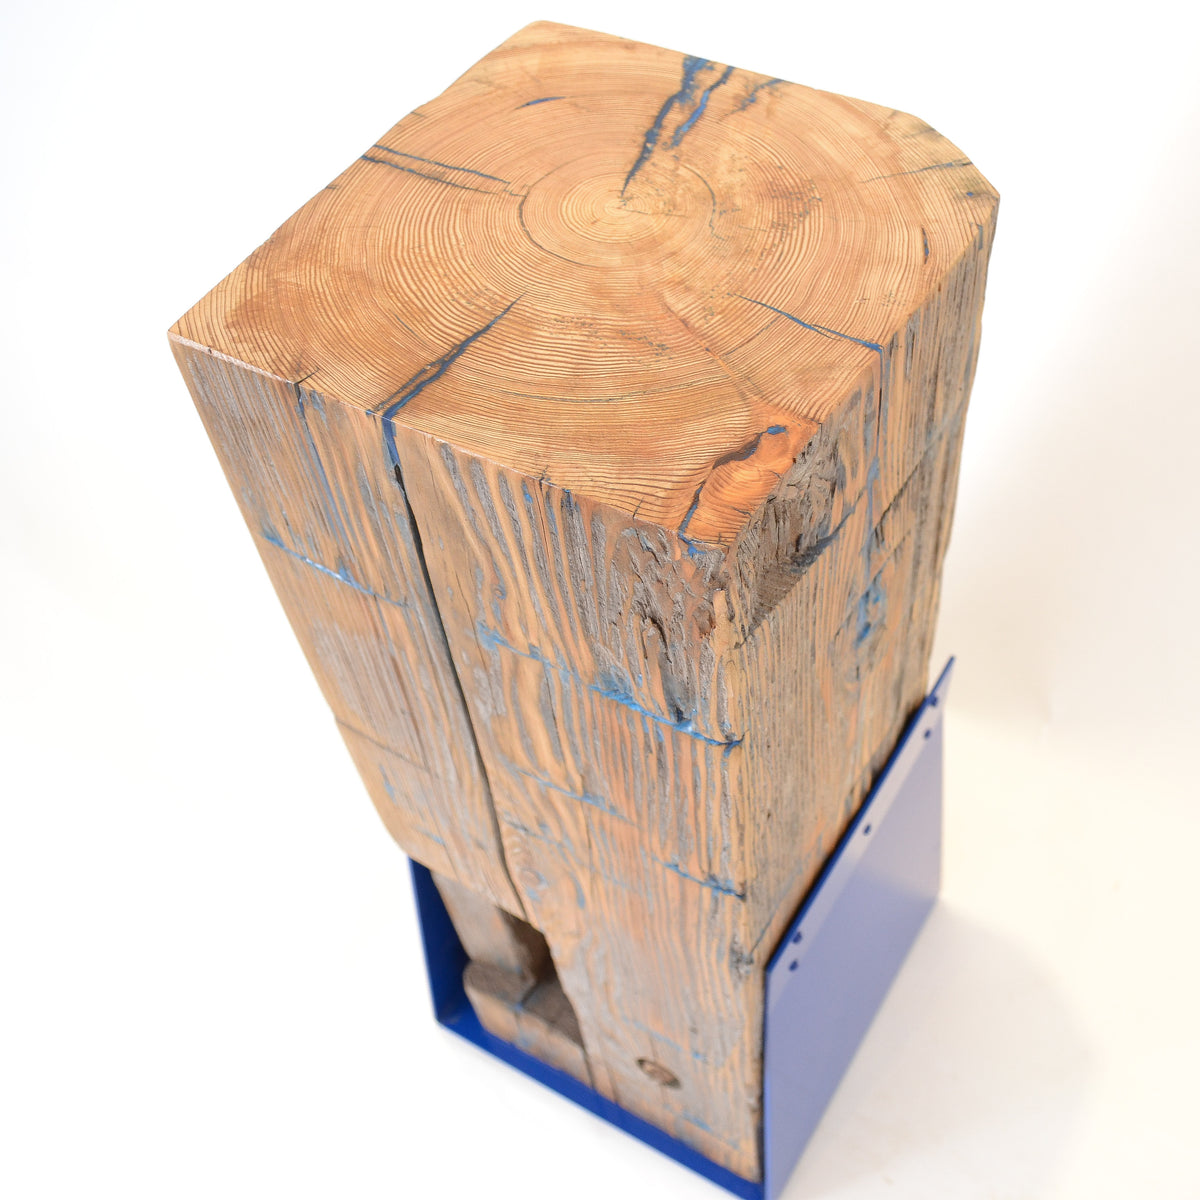 Barn Beam Upright Side Table: Hint of Blue